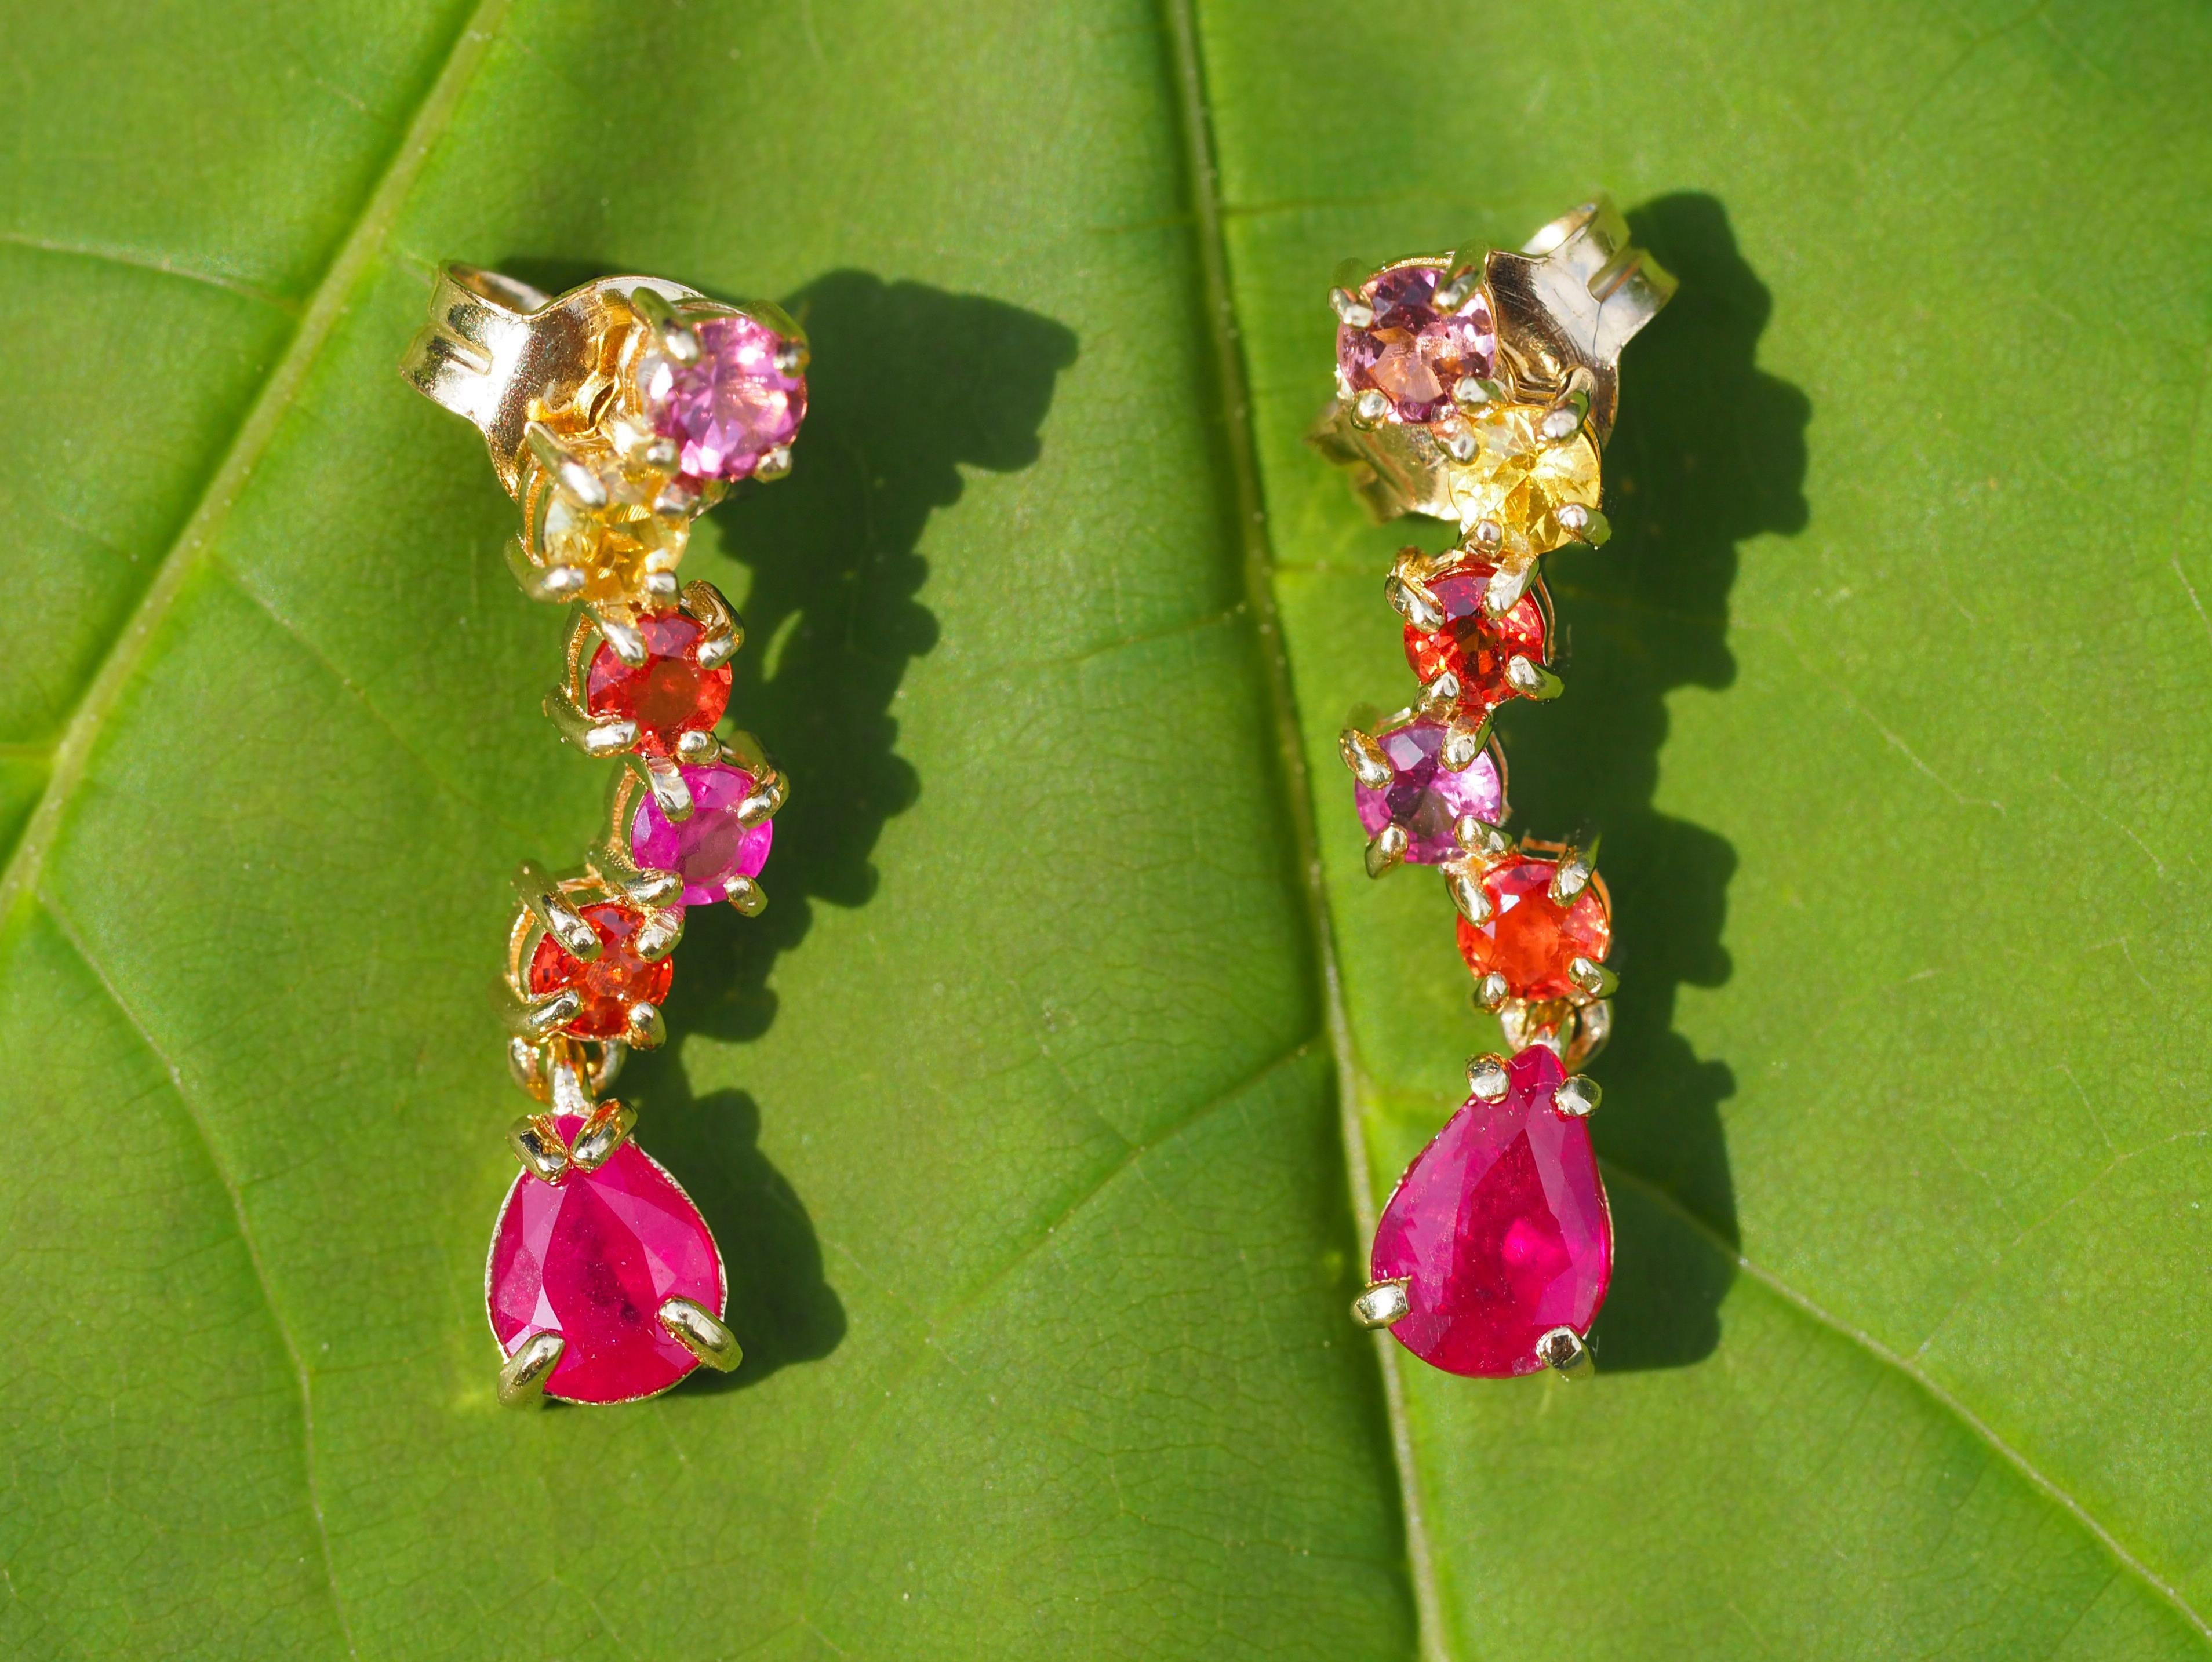 Pear ruby 14k gold earrings studs. 
Red, pink, orange and yellow sapphire studs. Colorfull gold earrings. Ruby earrings studs.

Total weight: 2.30 g.
Metal: 14k gold.
Size: 20 x 5 mm.

Central stones: Rubies - 2 pieces
Cut: Pear
Weight: approx 1.2